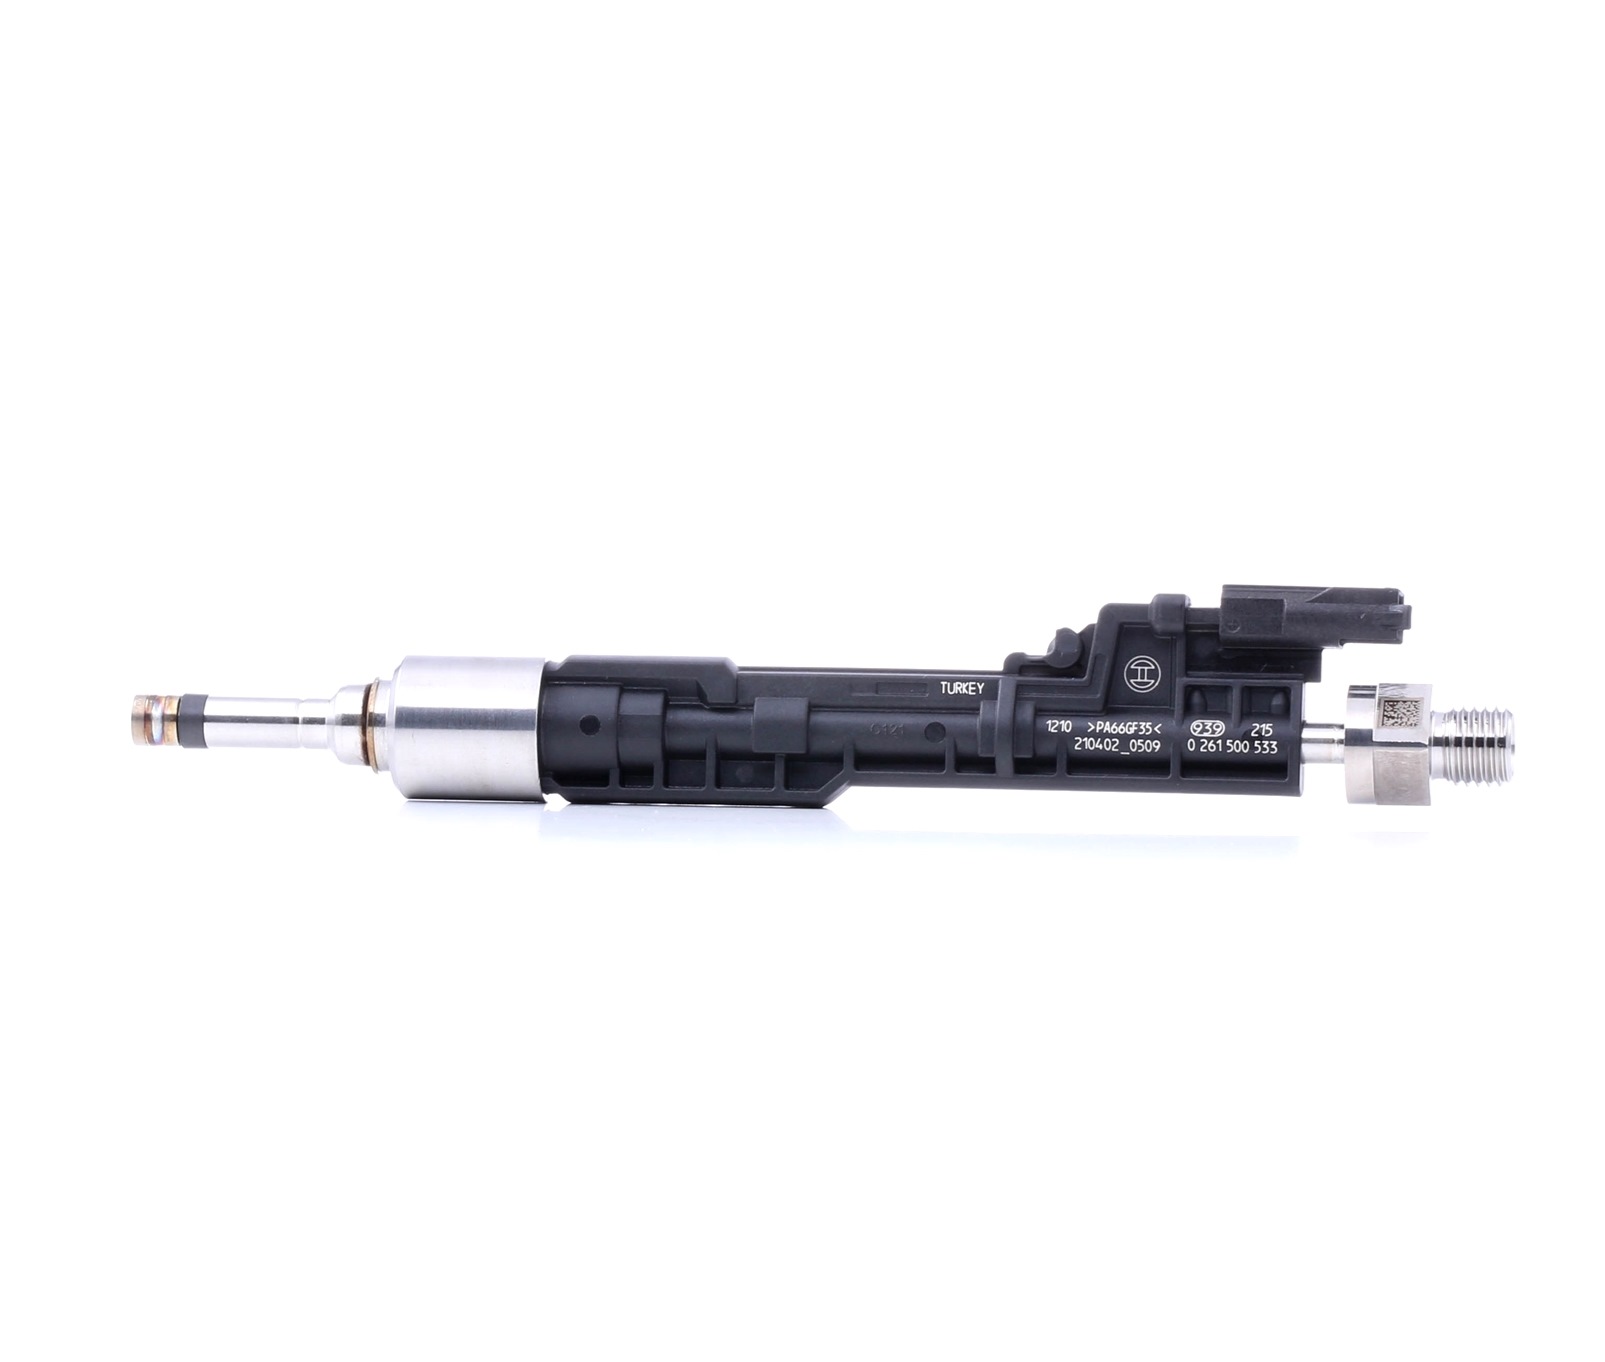 Original BOSCH HDEV-5-2LE Fuel injector 0 261 500 533 for BMW 3 Series